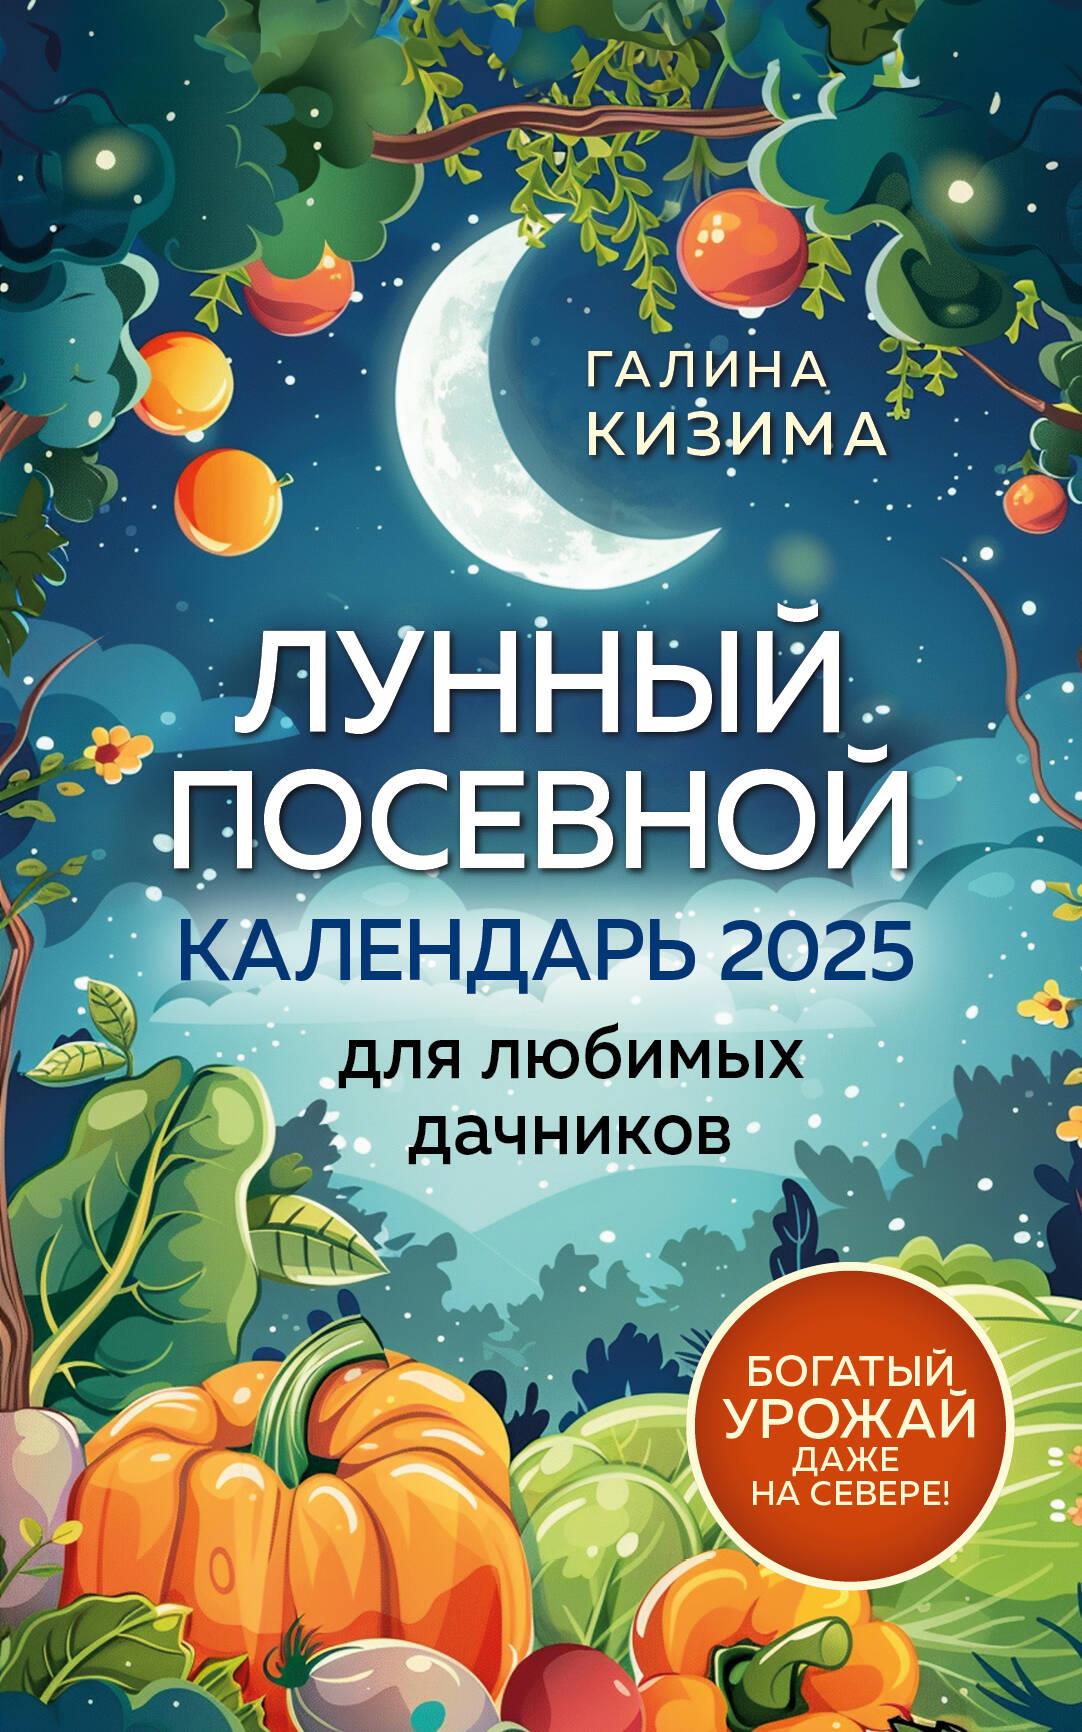 Lunar sowing calendar for your favorite summer residents 2025 from Galina Kizima